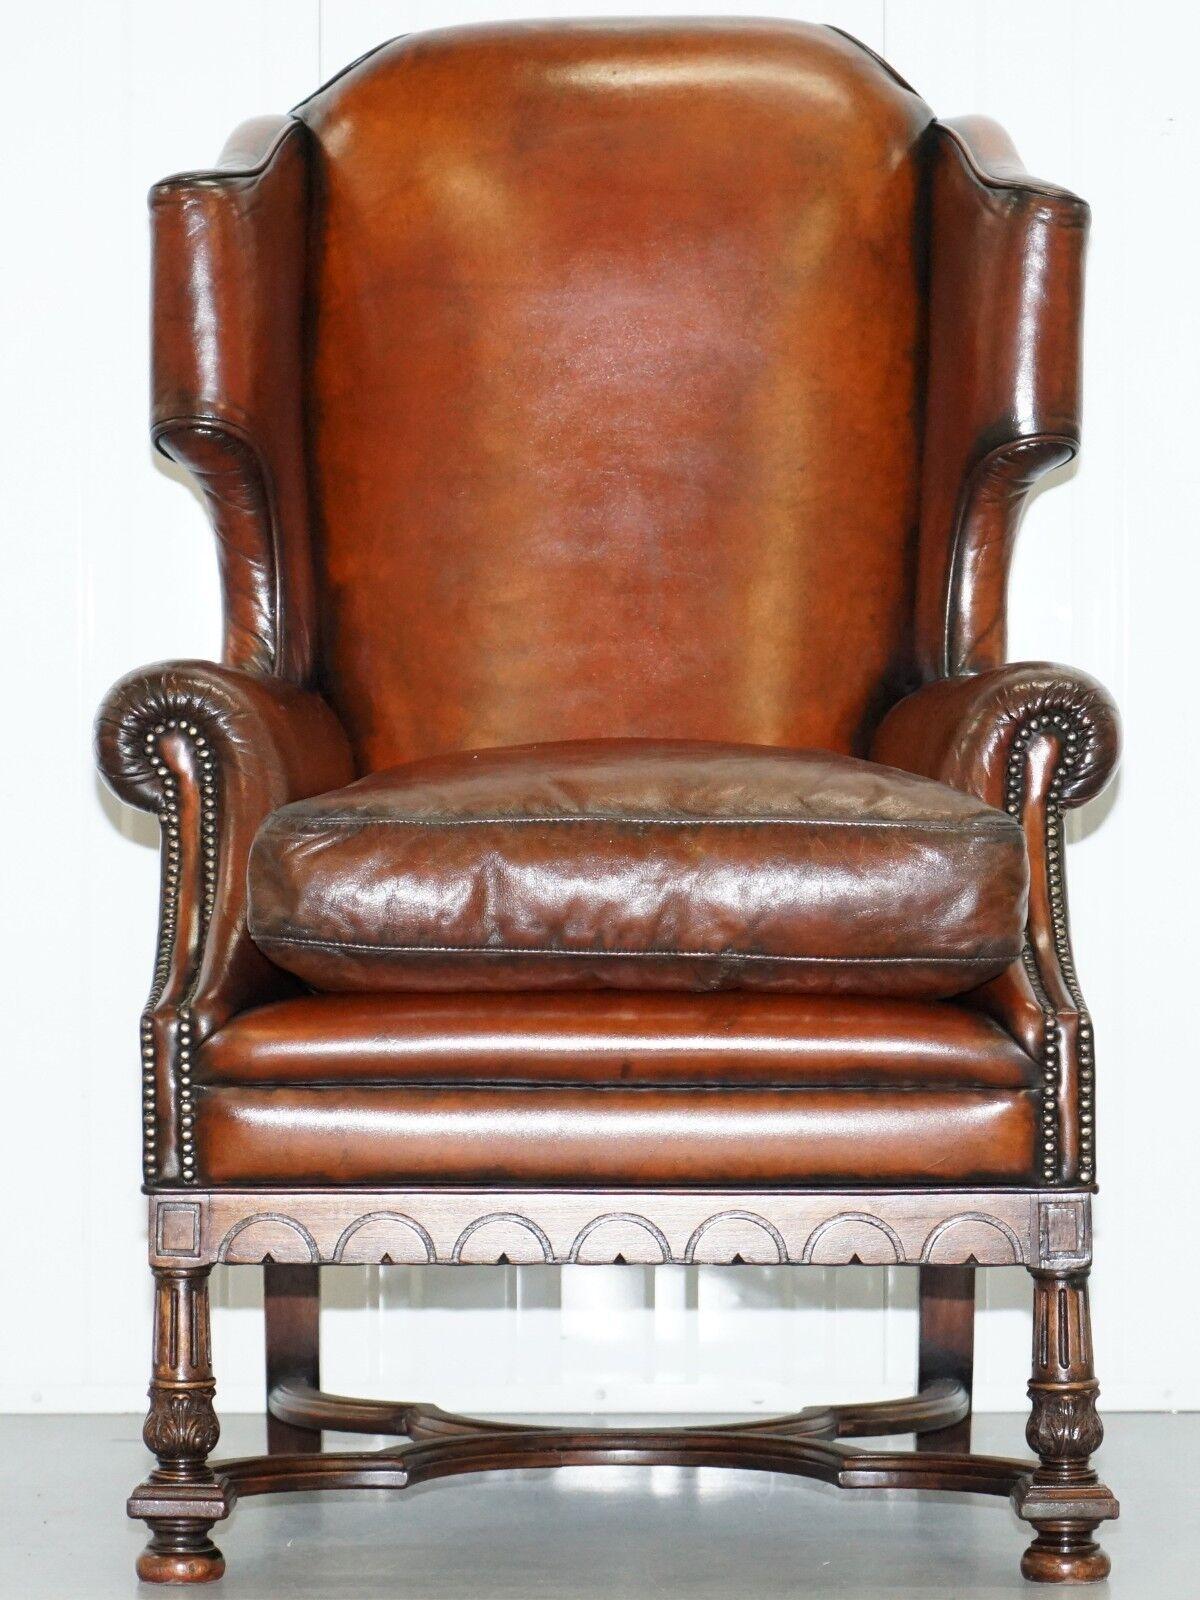 Royal House Antiques

Royal House Antiques is delighted to offer for sale this lovely antique William & Mary style Victorian wingback armchair in fully restored condition.

Please note the delivery fee listed is just a guide, it covers within the